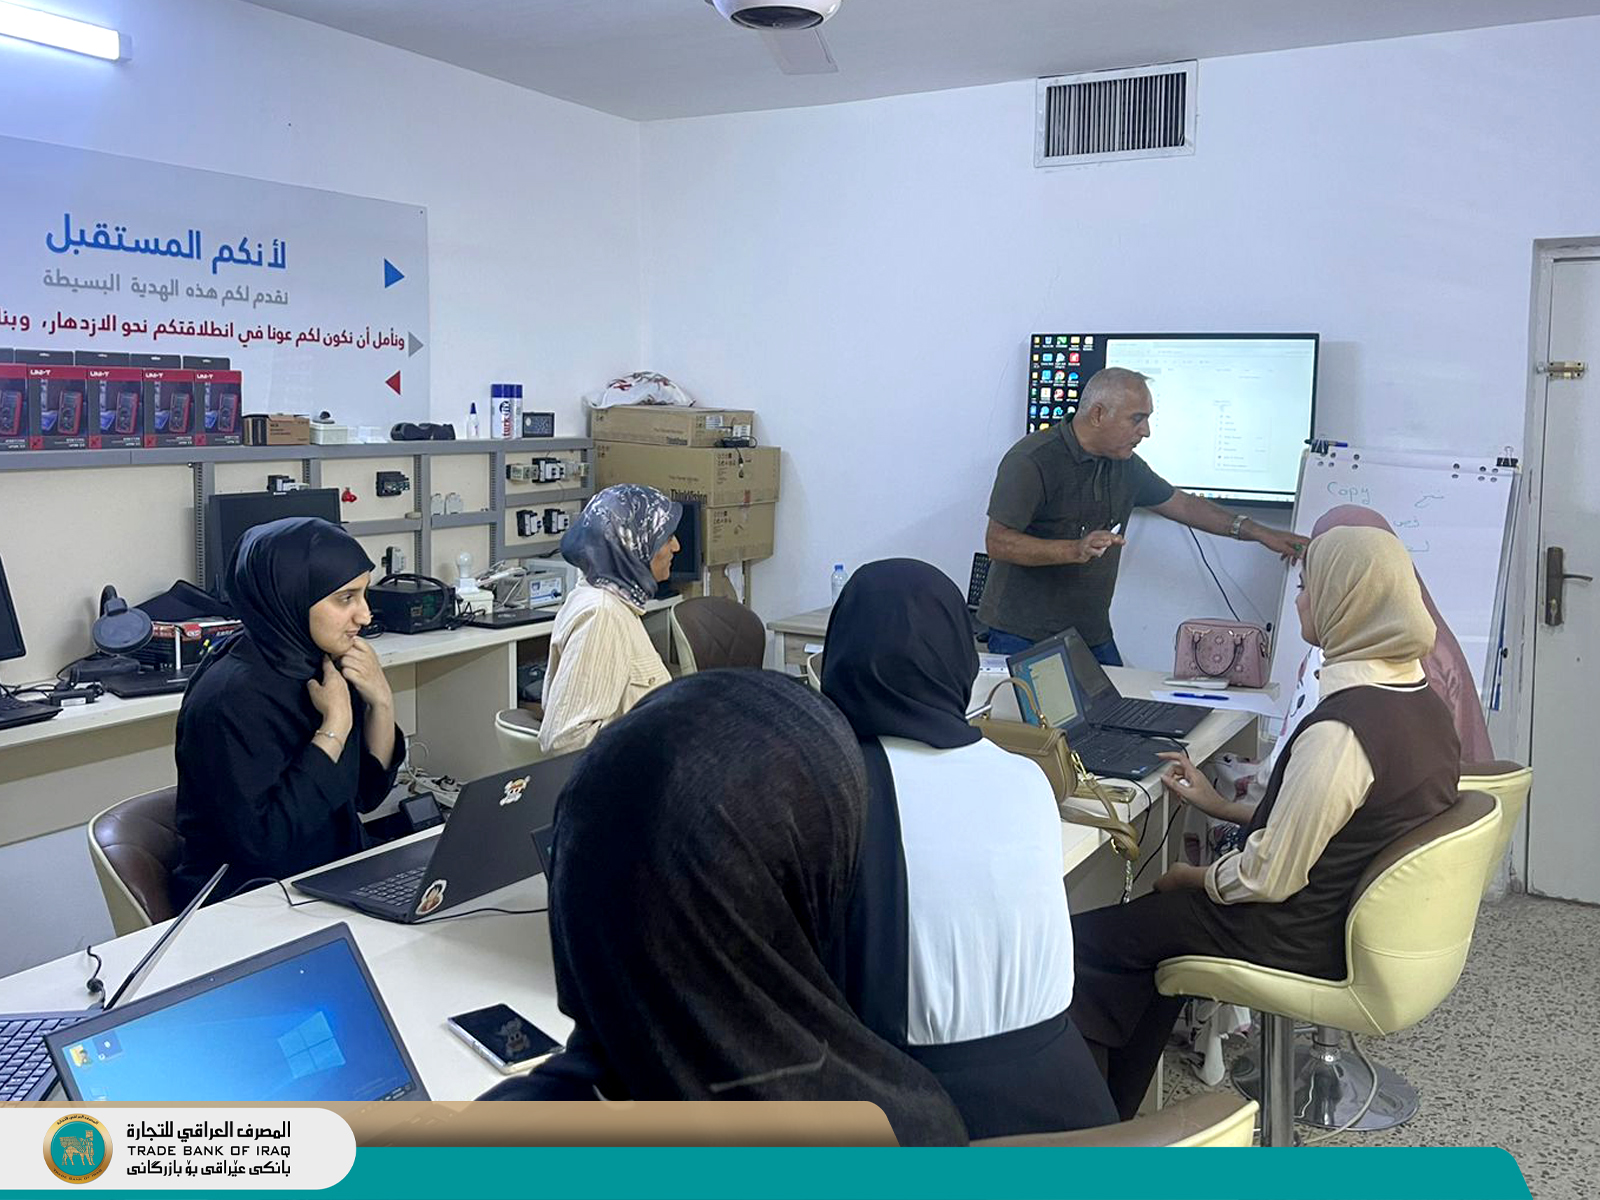 In line with the National Strategy for Iraqi Women launched by the General Secretariat of the Council of Ministers, Trade Bank of Iraq (TBI) held a training course on computer programs for a number of female students